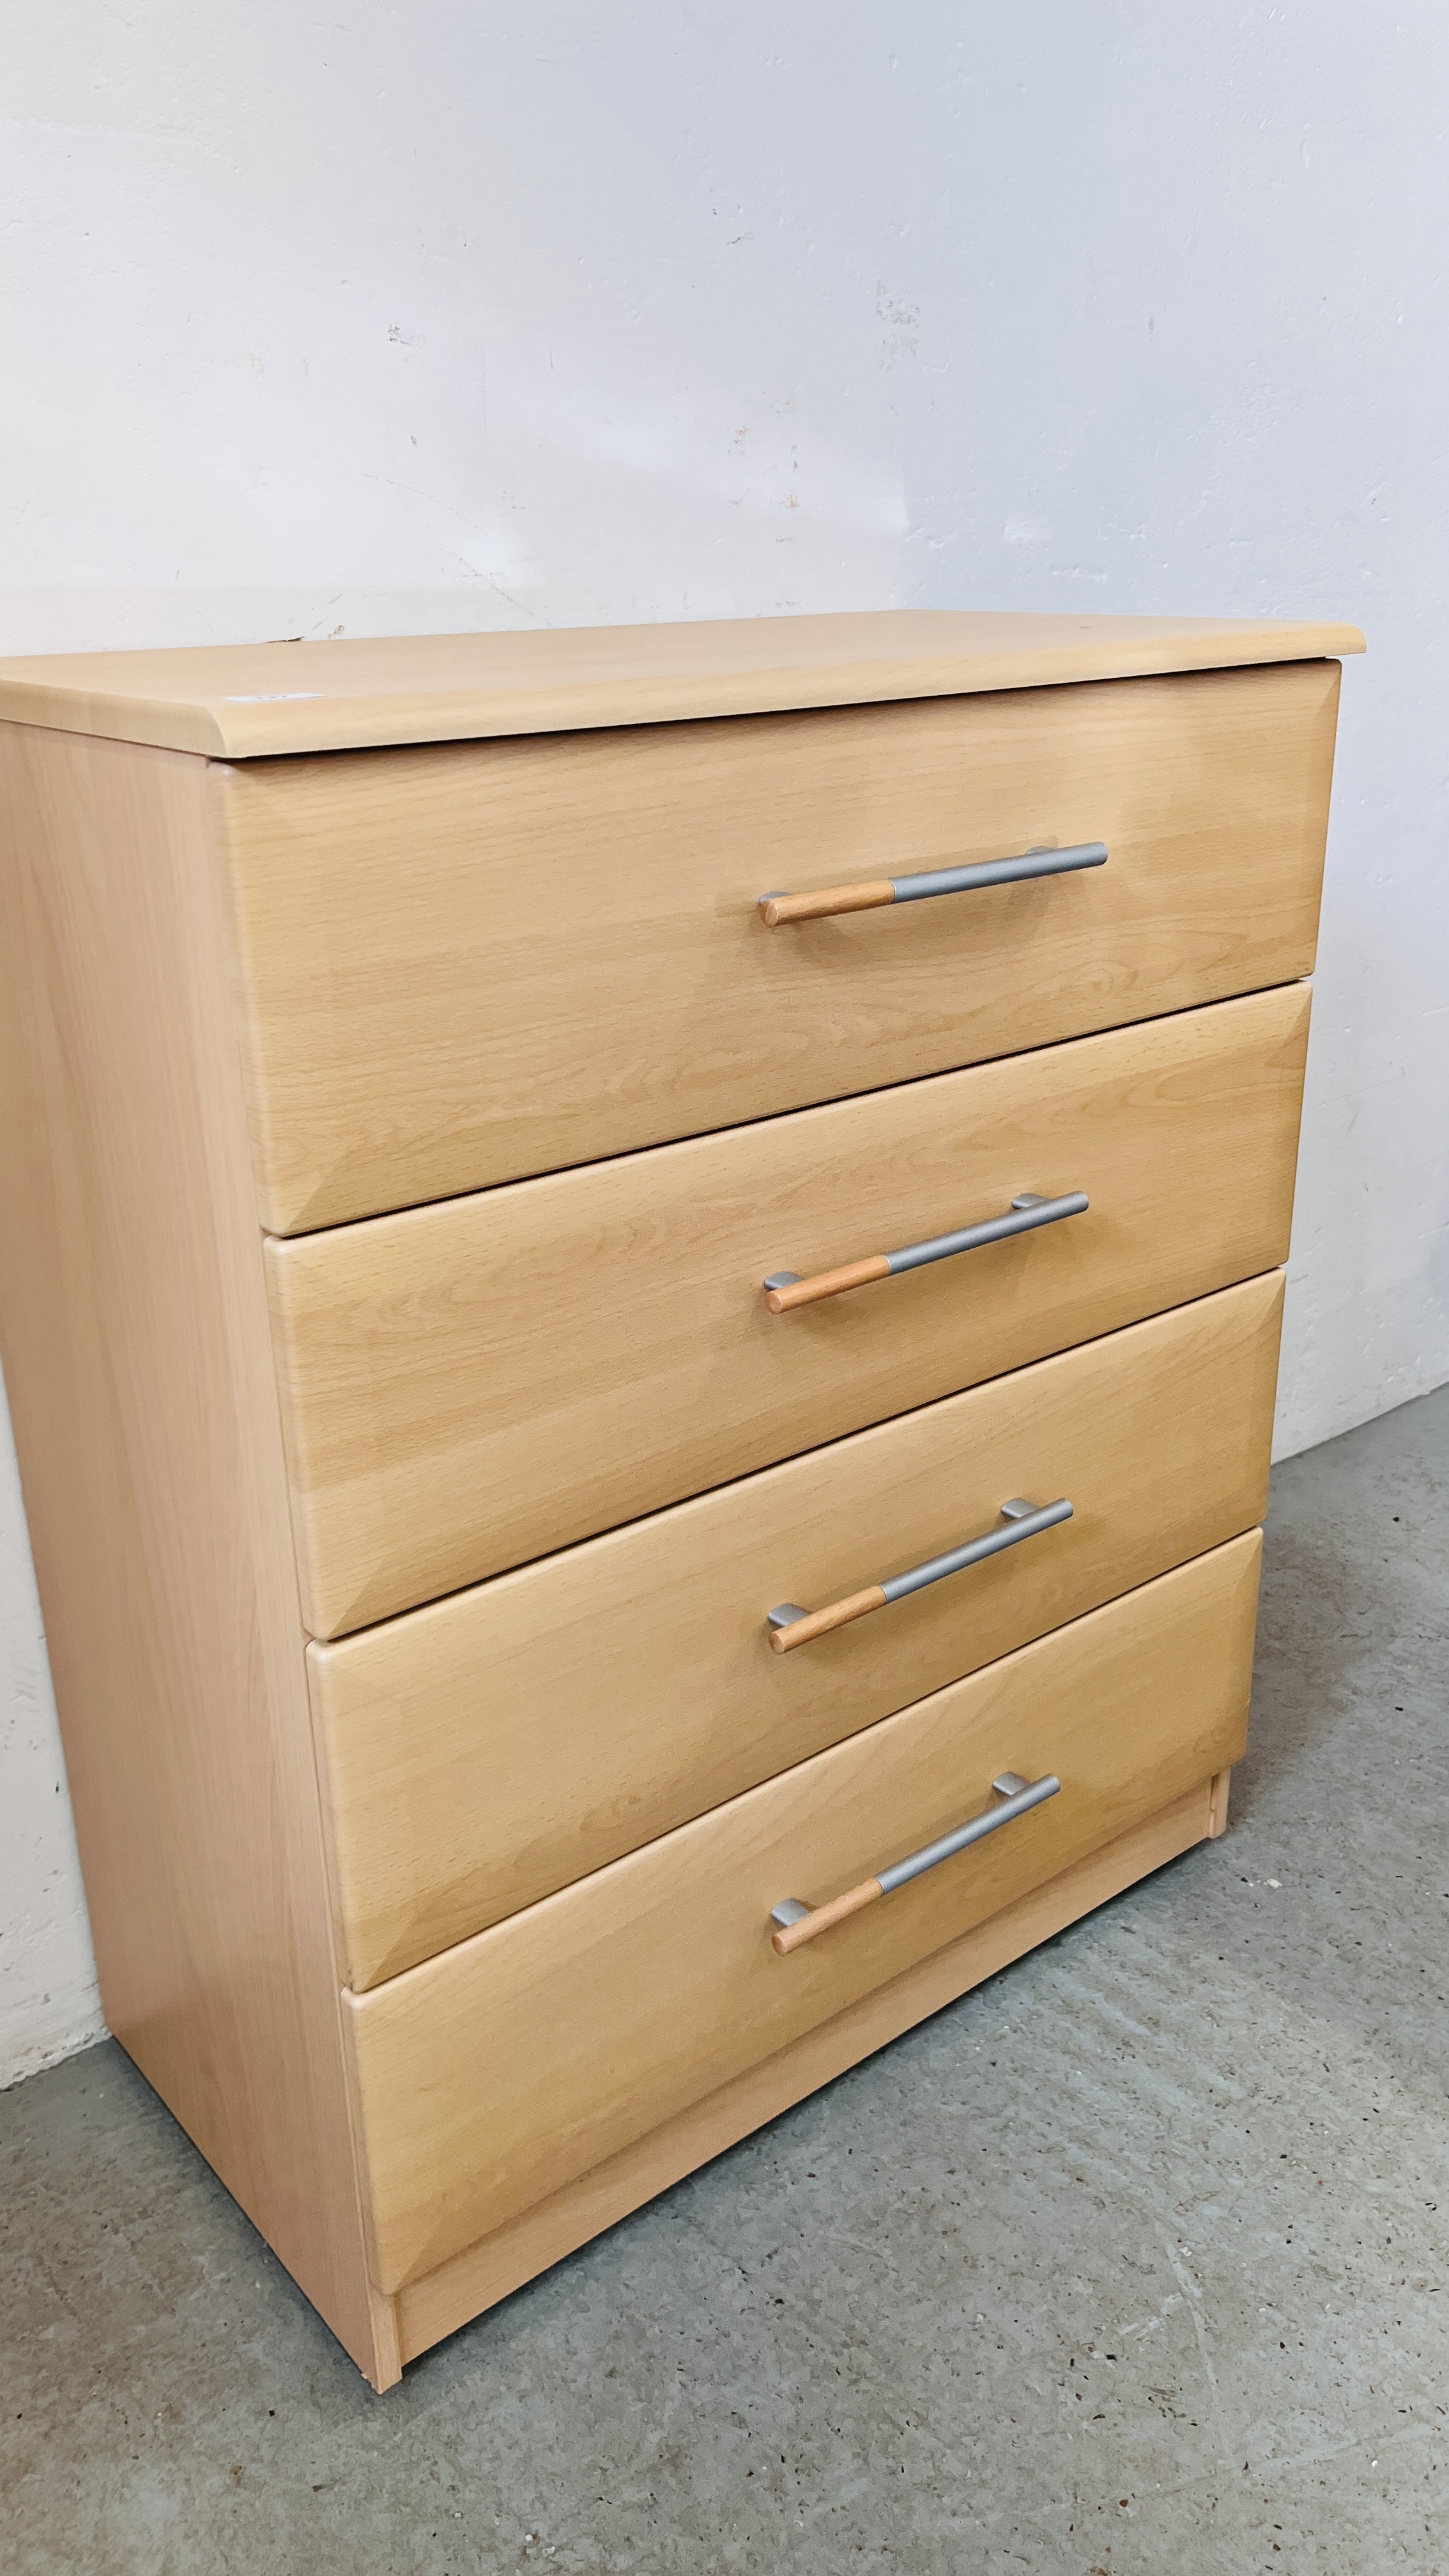 A MODERN BEECH WOOD FINISH FOUR DRAWER BEDROOM CHEST - W 77CM. D 41CM. H 94CM. - Image 4 of 6